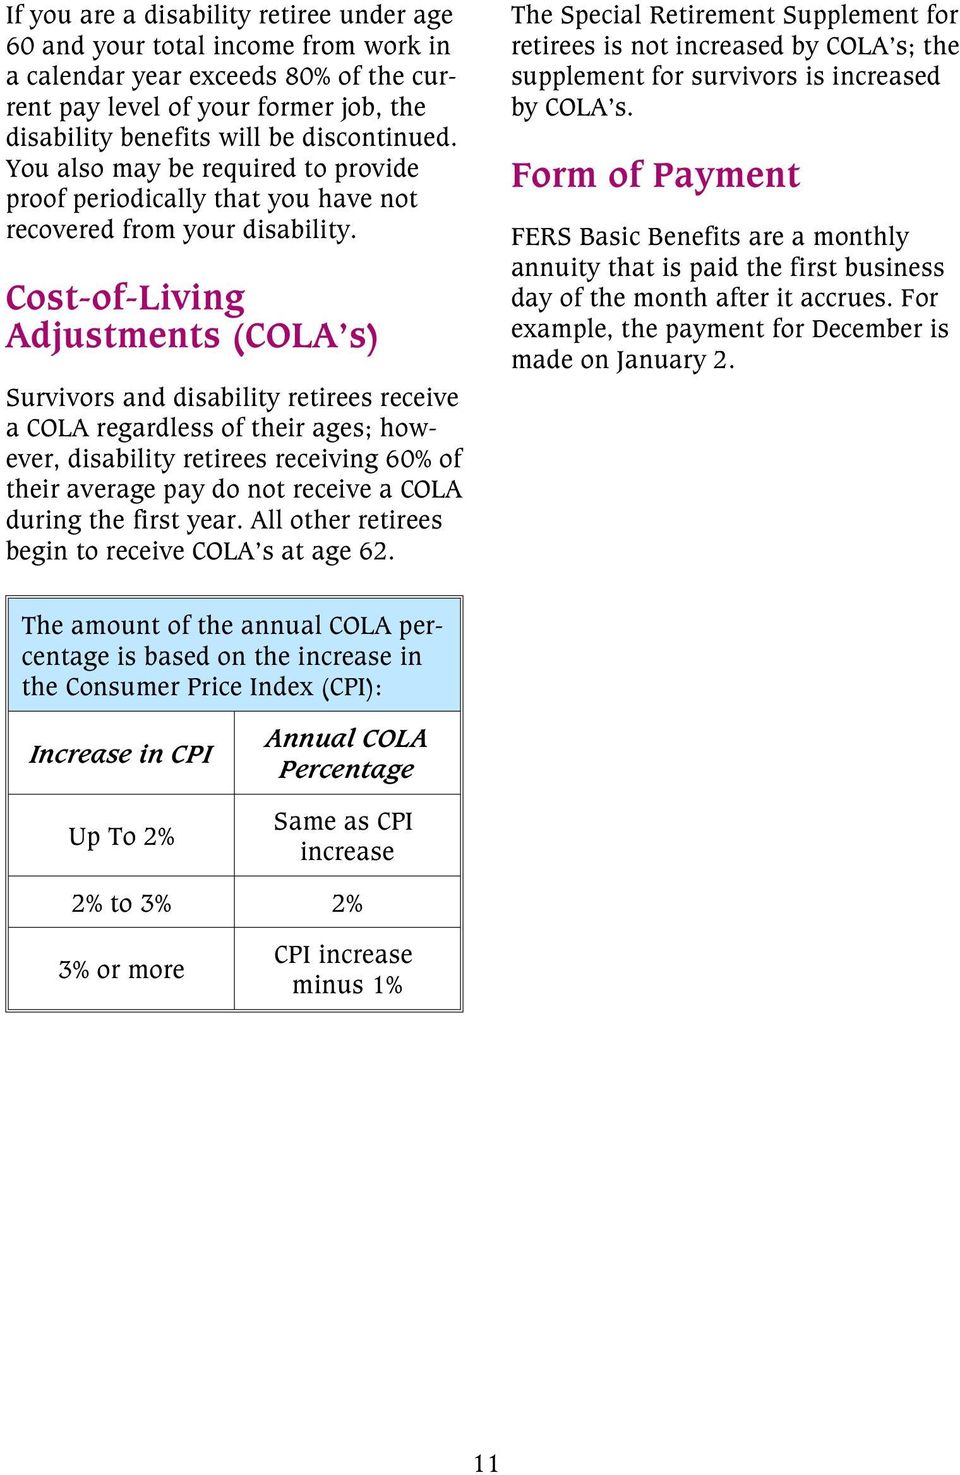 Cost-of-Living Adjustments (COLA s) Survivors and disability retirees receive a COLA regardless of their ages; however, disability retirees receiving 60% of their average pay do not receive a COLA